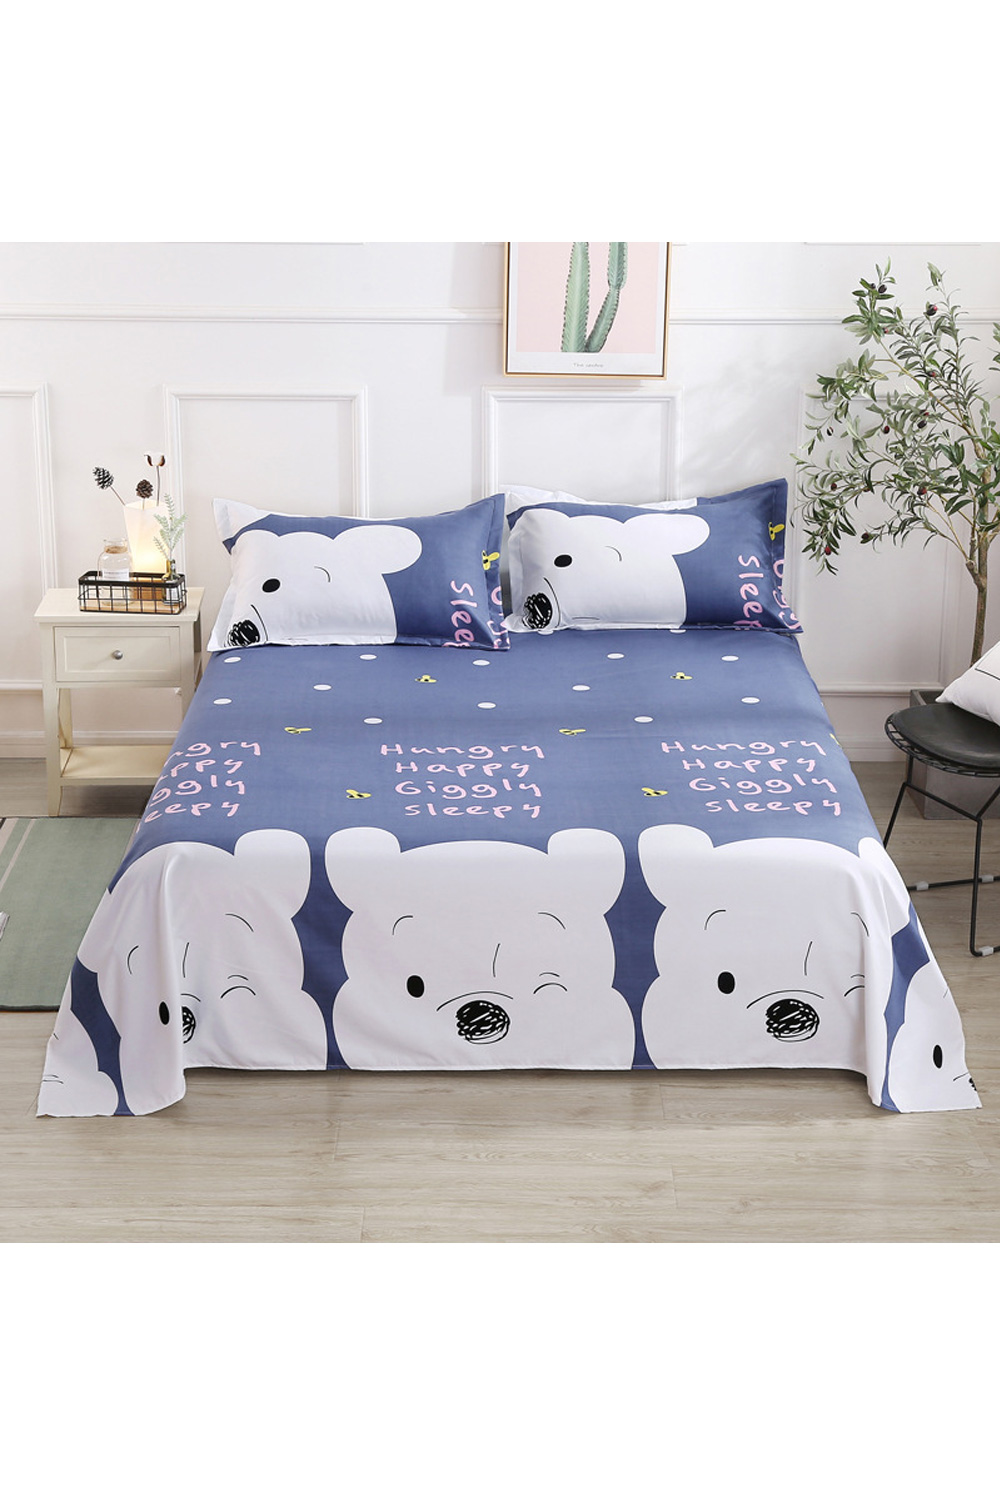 KettyMore Home Decor Cute Bear Printed Bed Sheet Soft With Two Pillow Covers